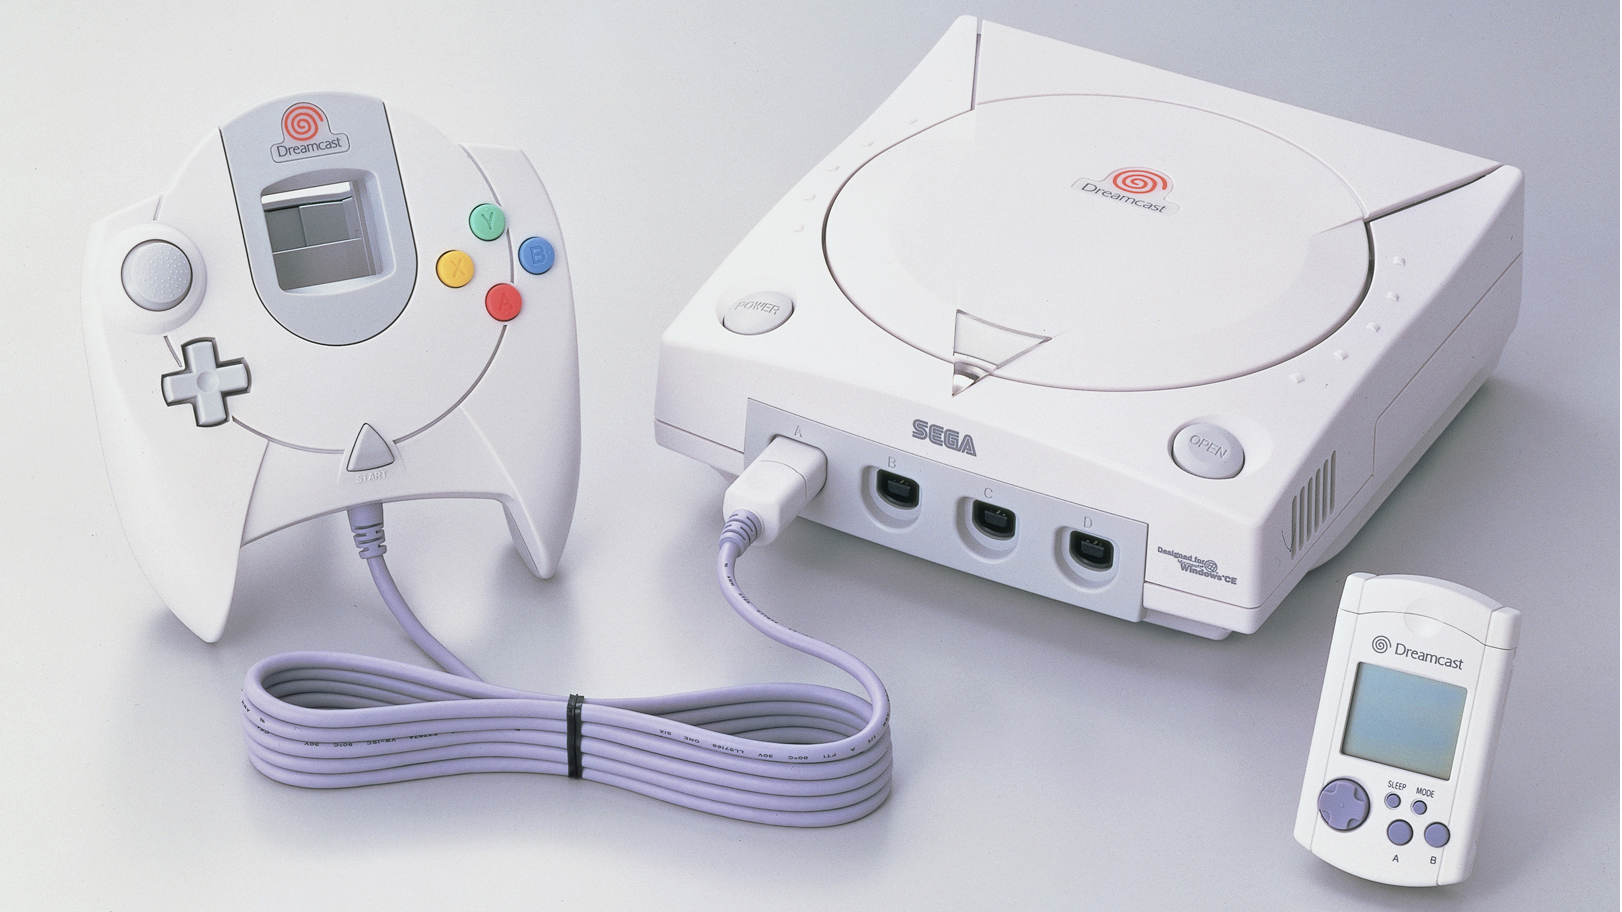 15 Reasons Dreamcast Rocked  - Compact Design